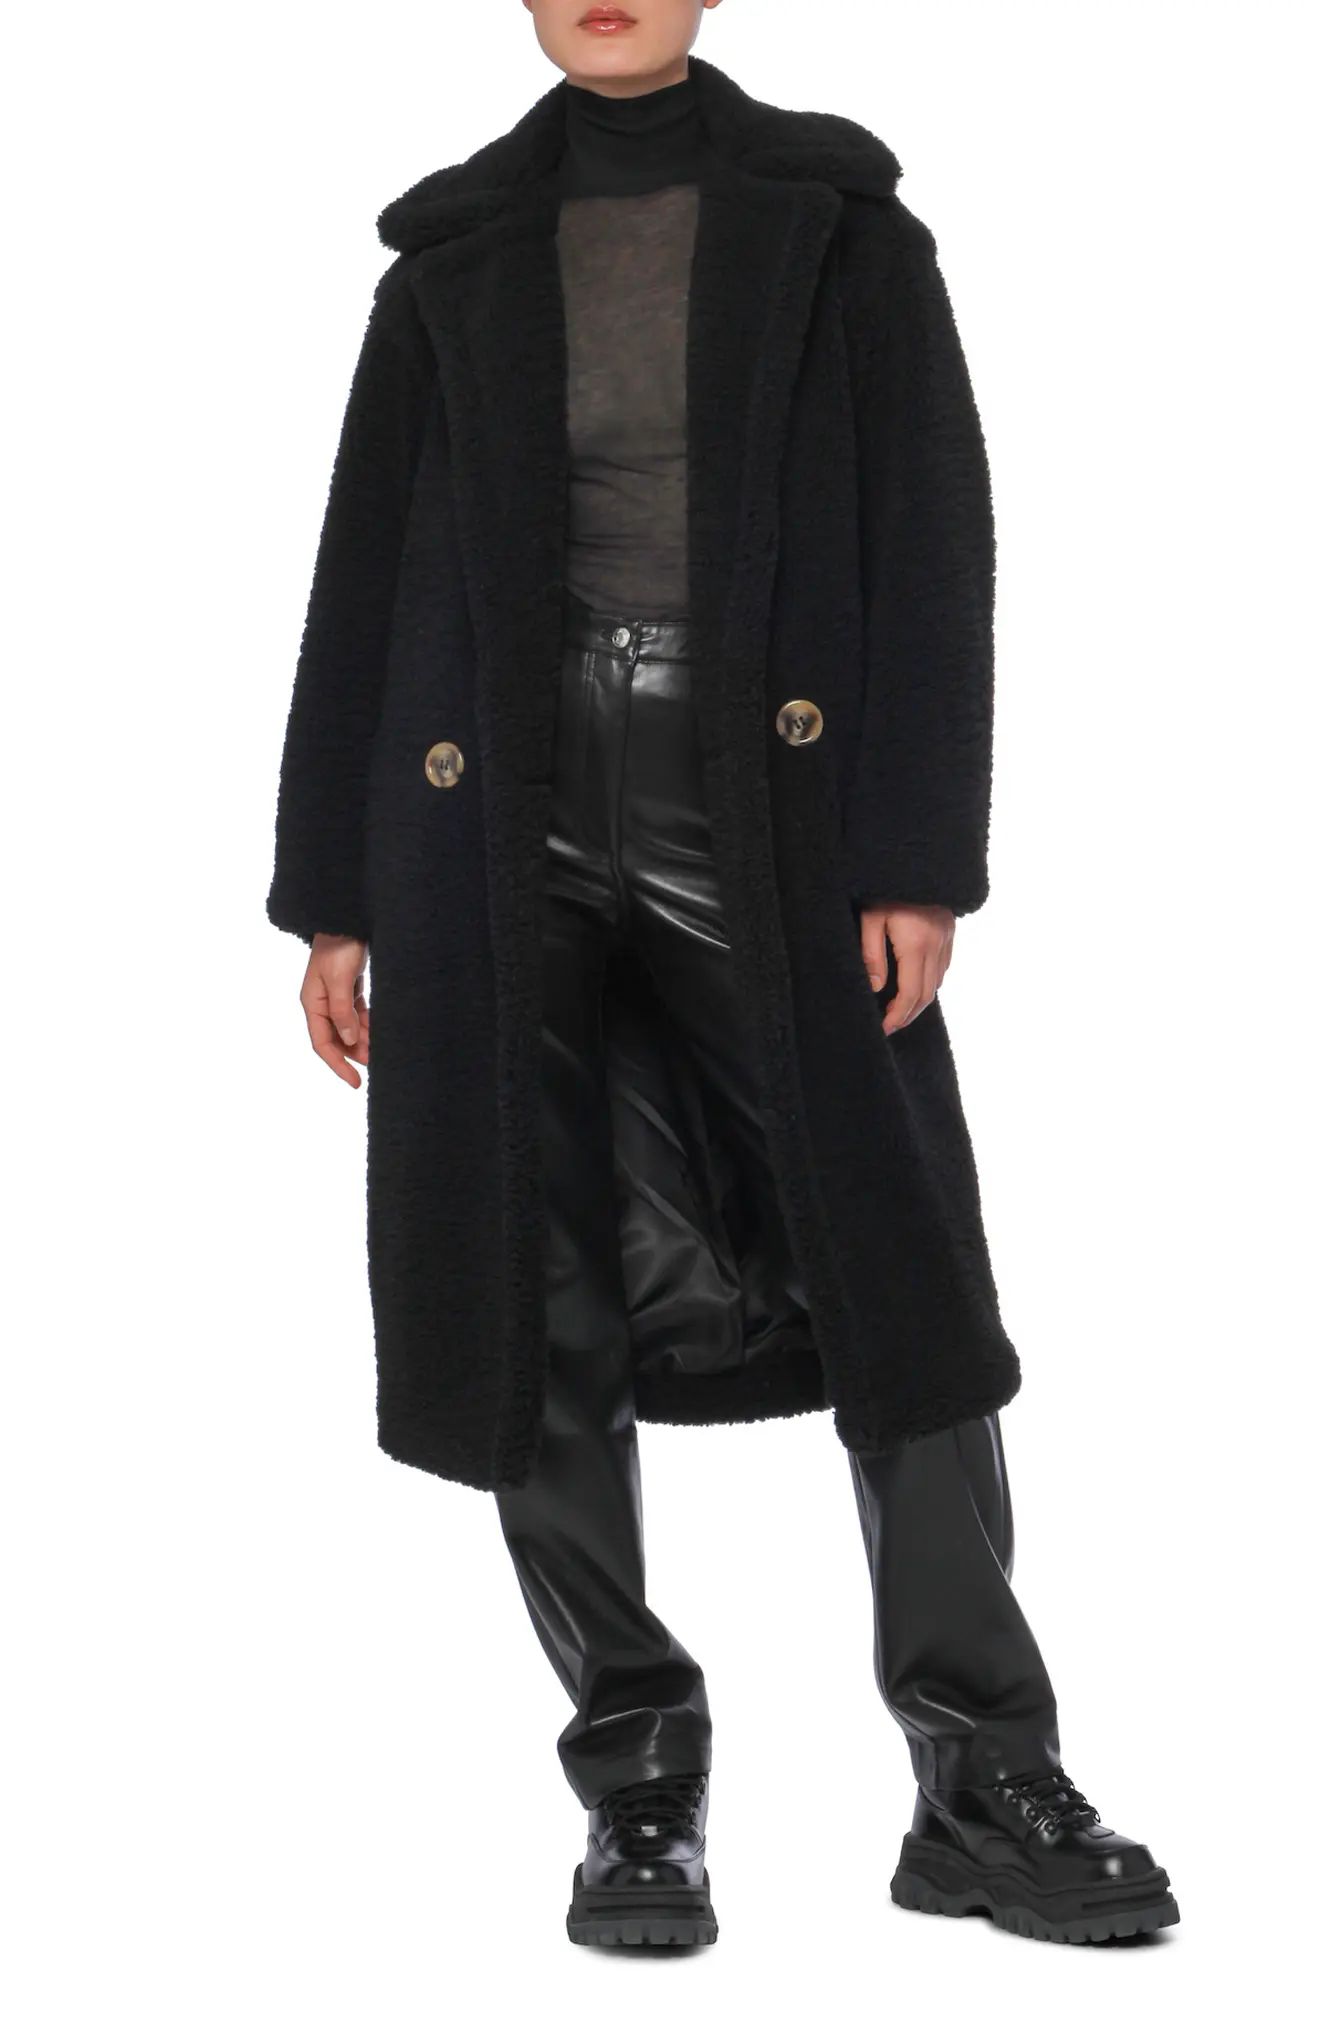 Apparis Daryna Faux Fur Coat, Size Small in Noir at Nordstrom | Nordstrom